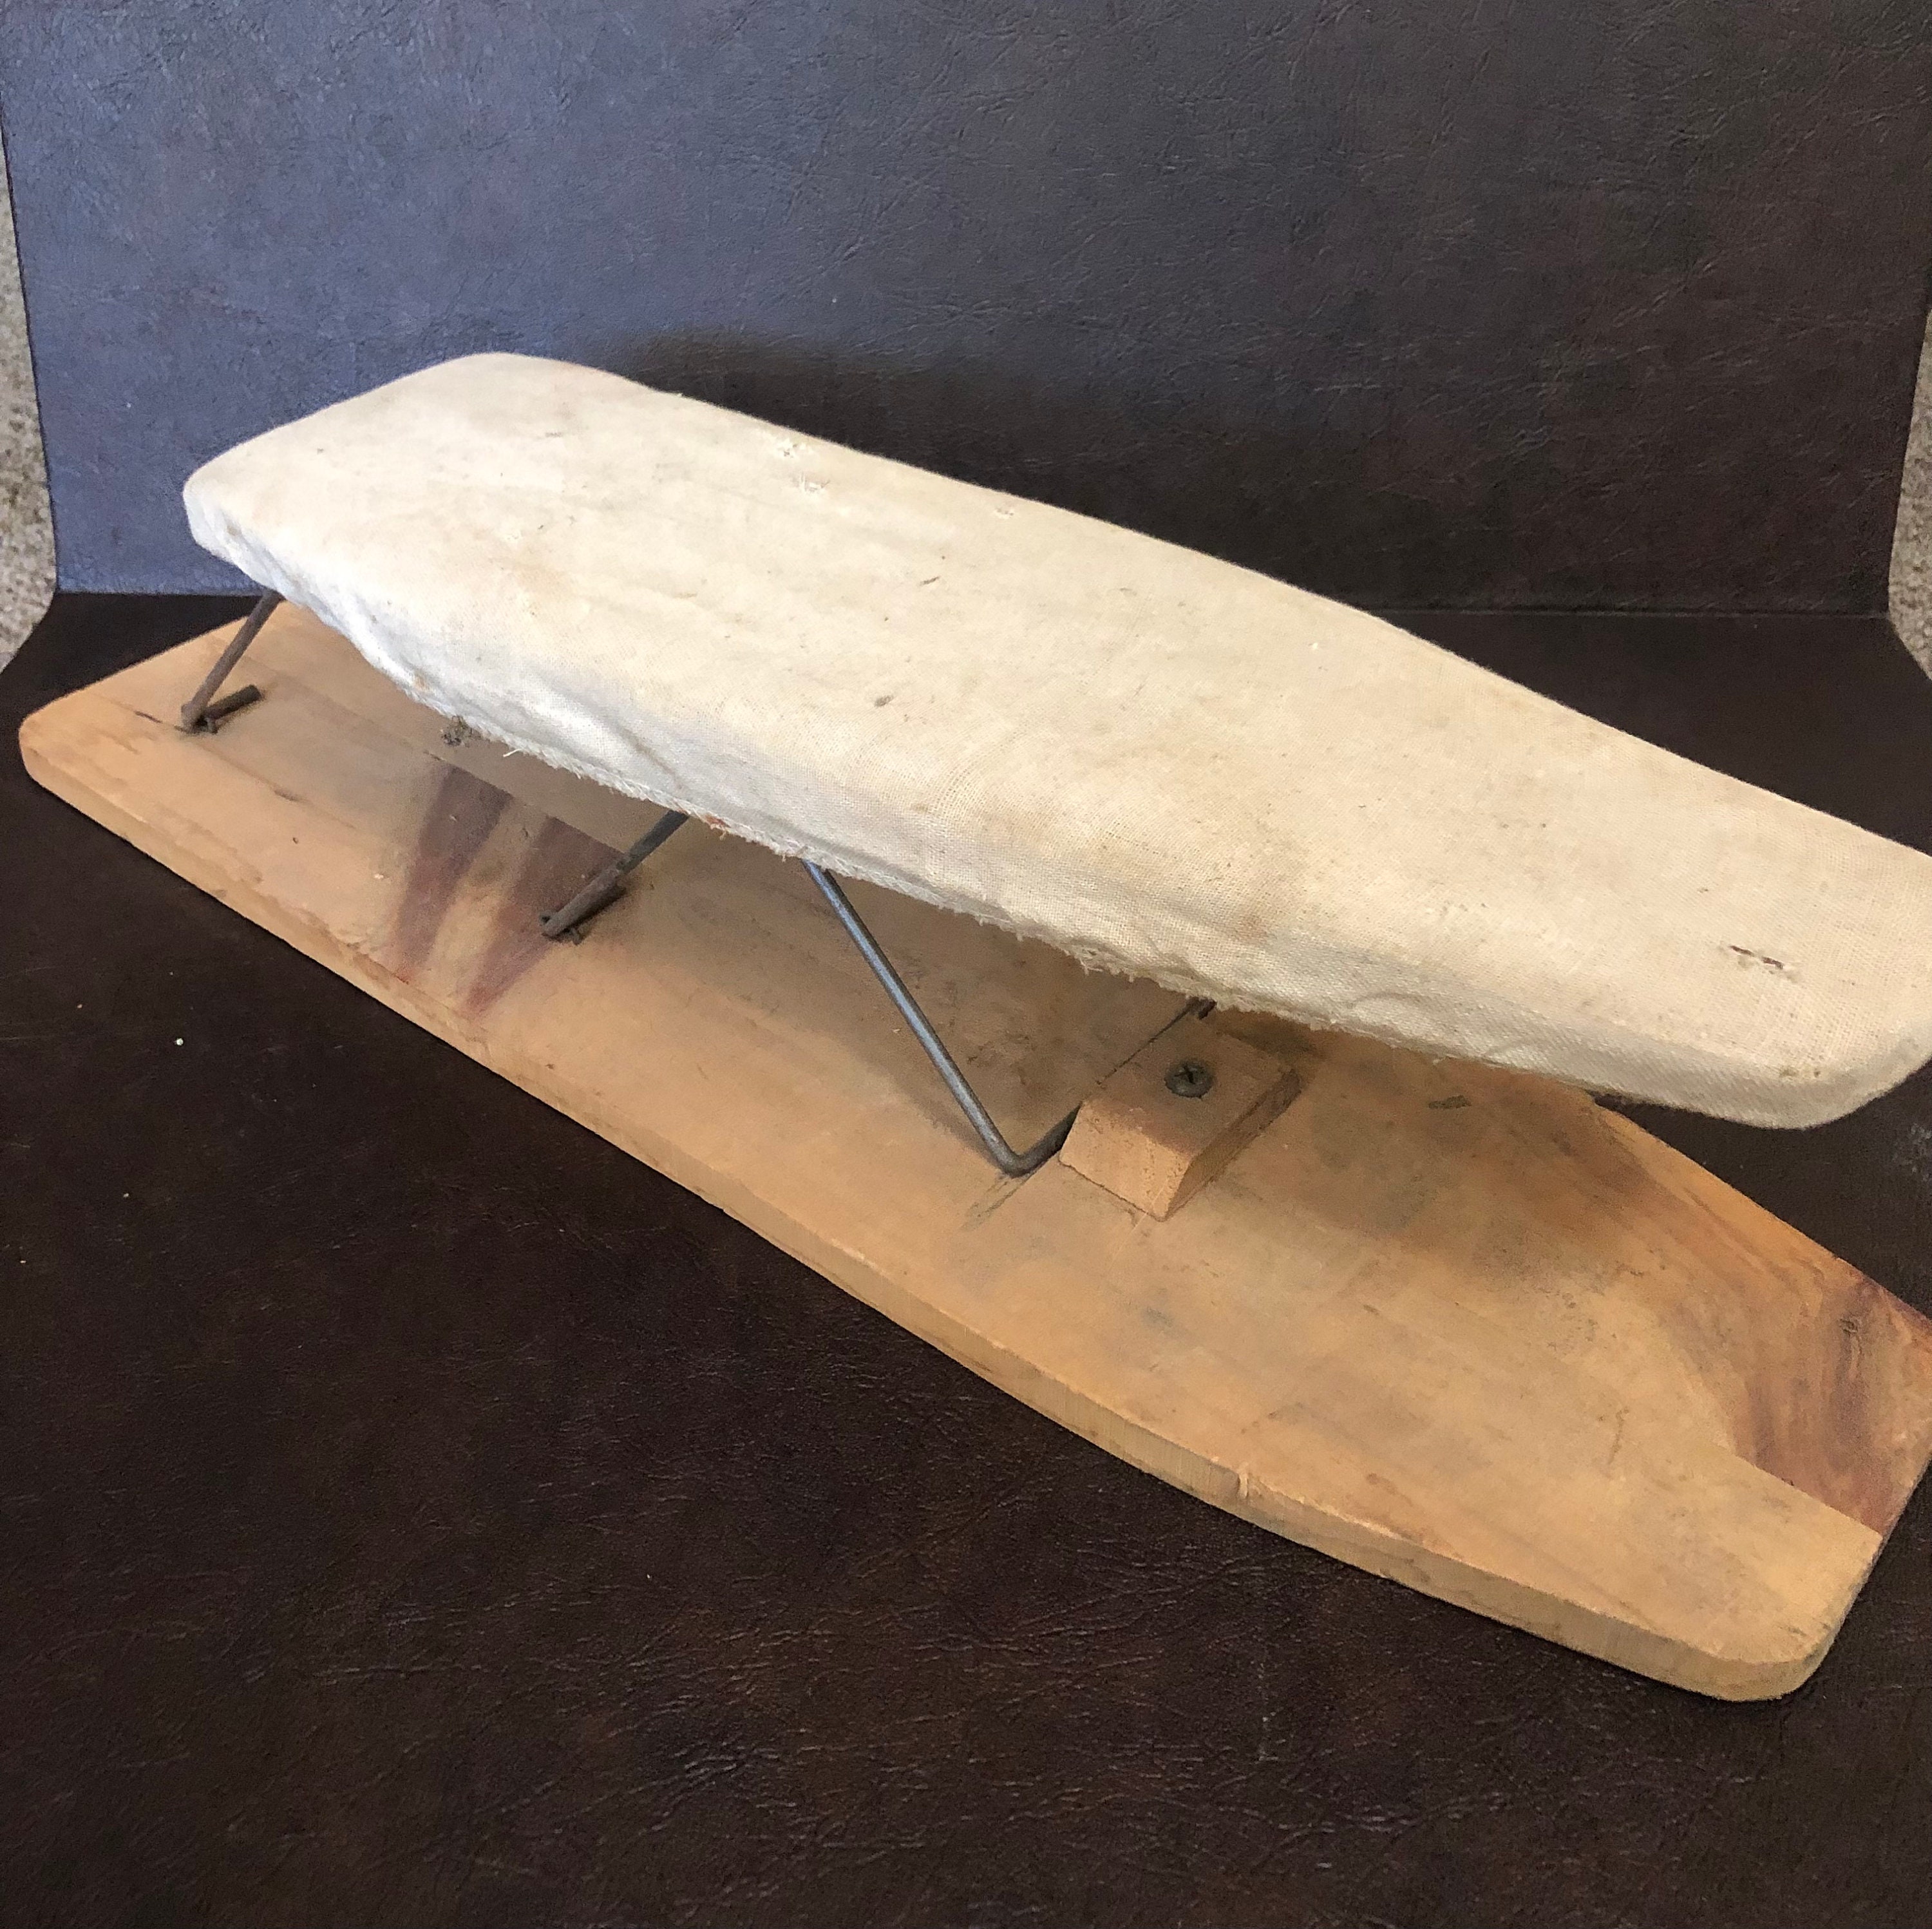 Vintage Tailors Sleeve Board wooden seamstress Ironing work table item